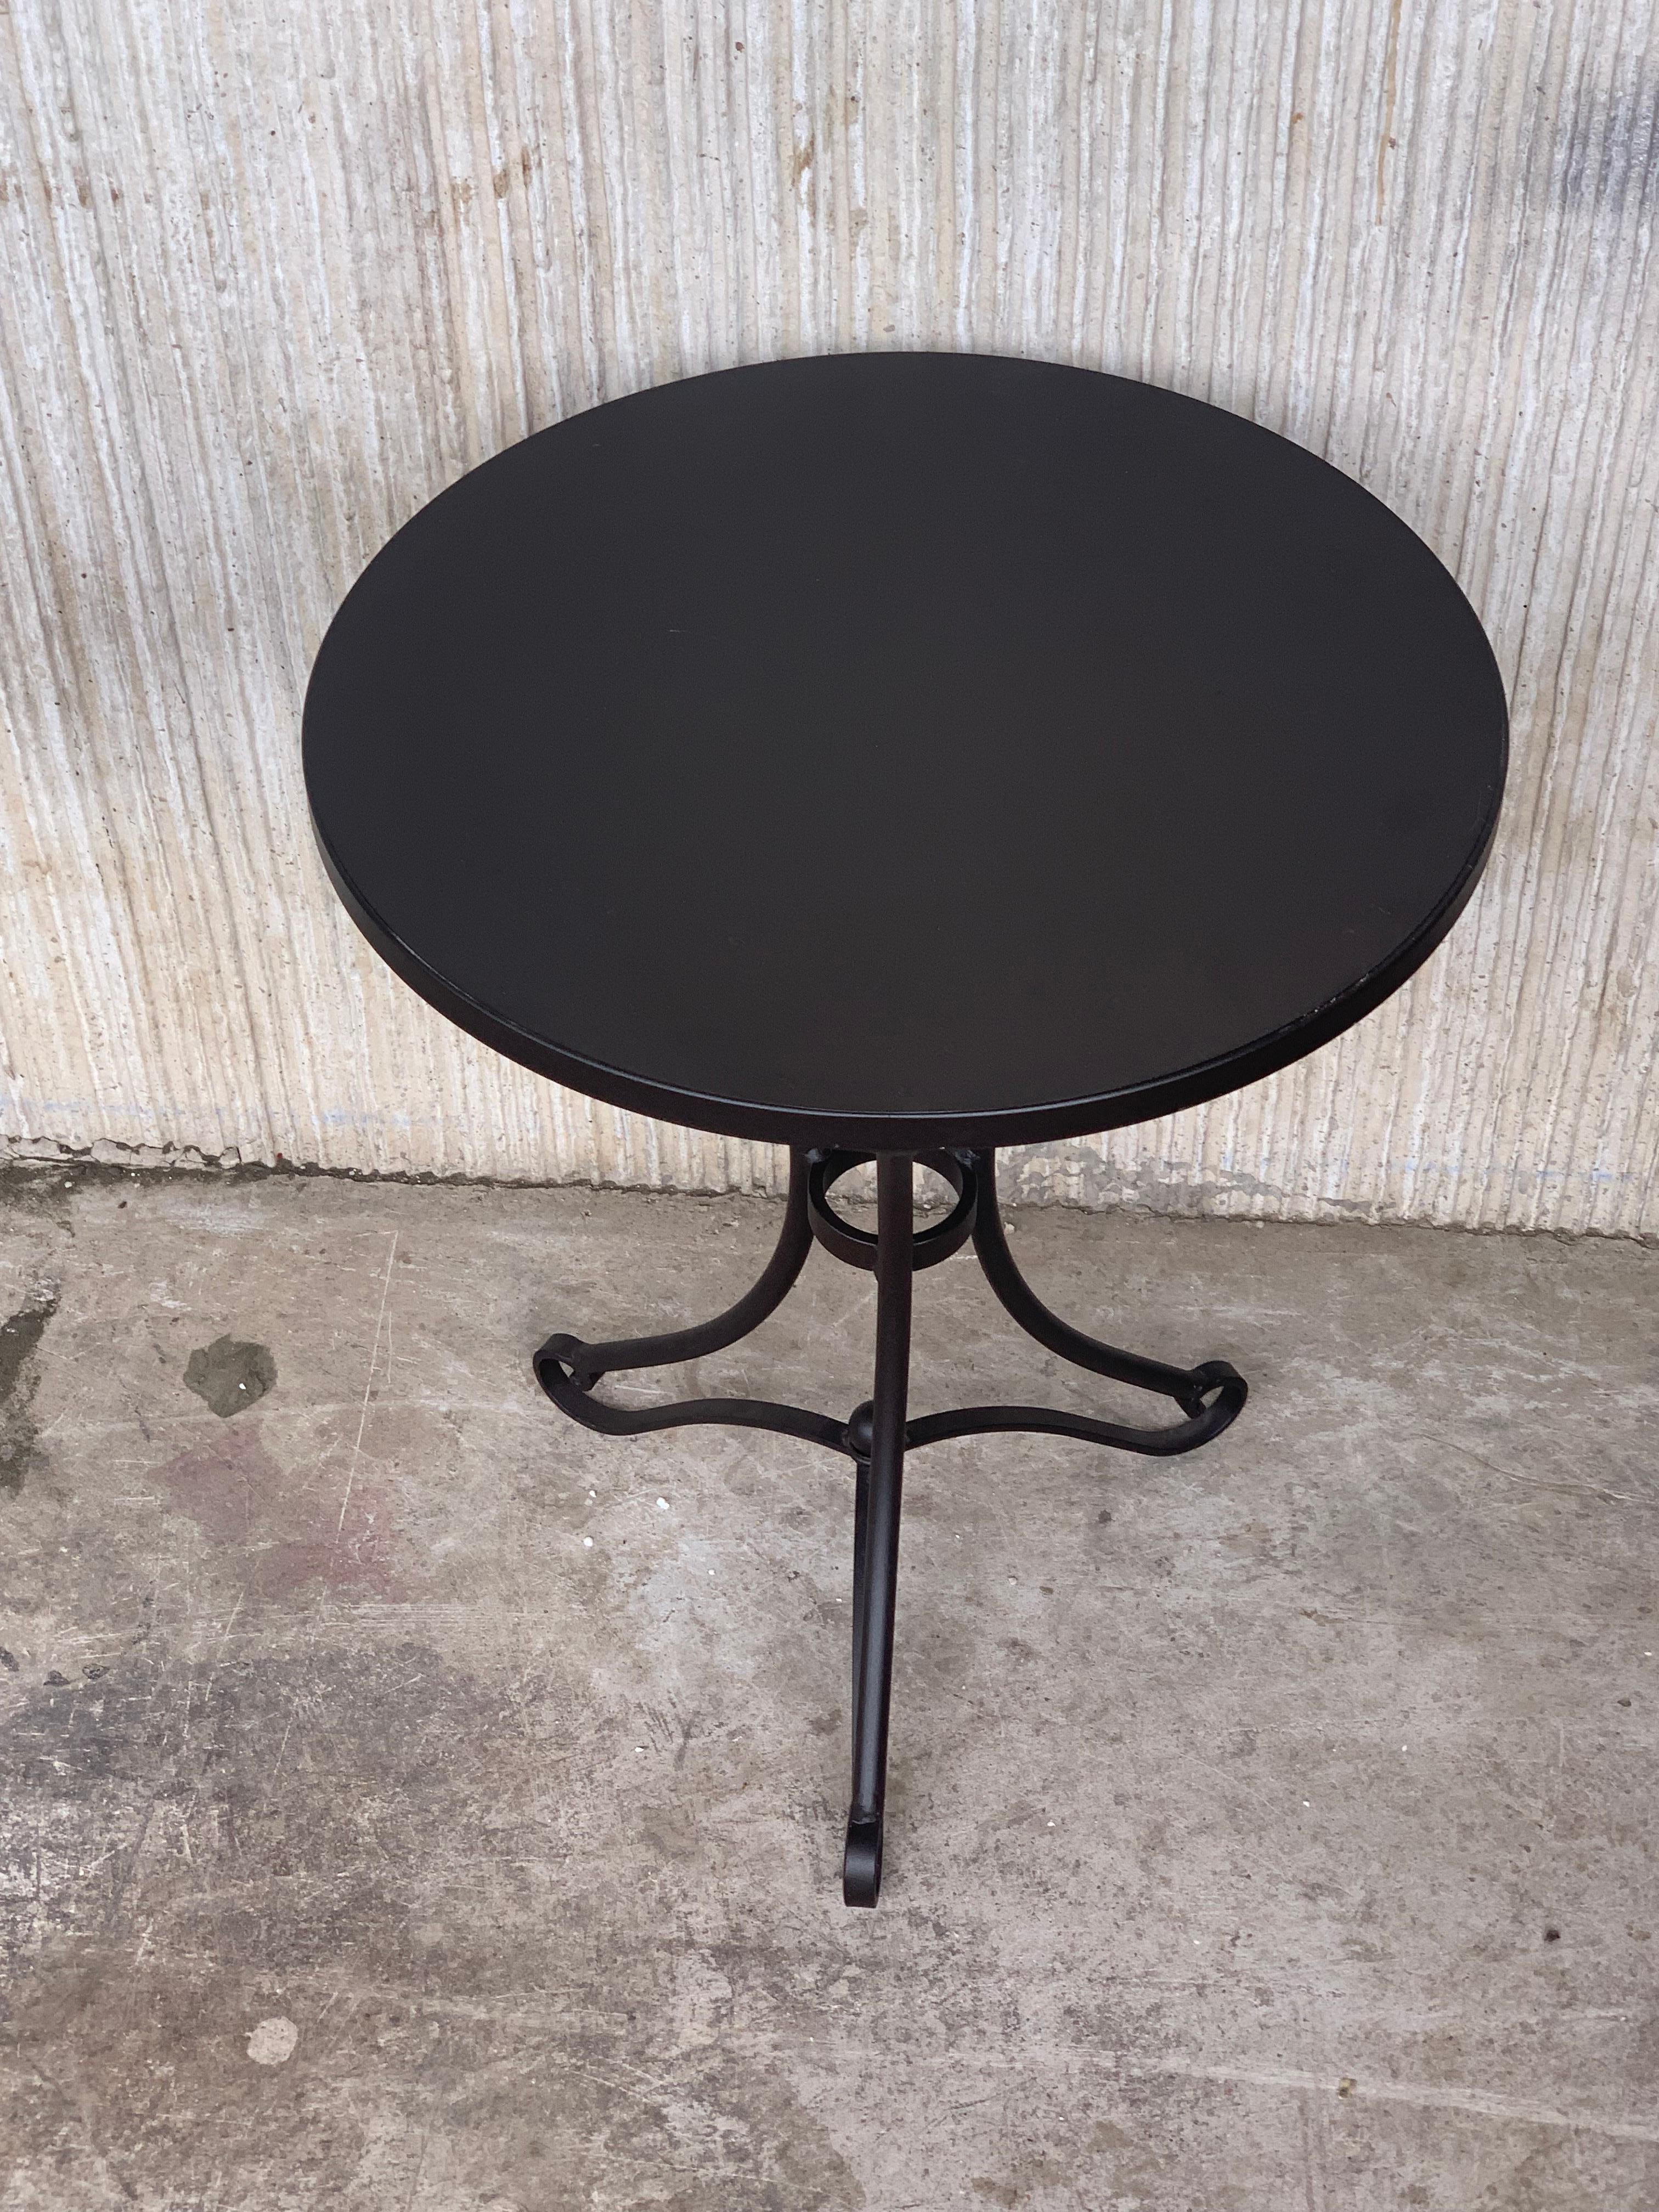 Spanish 20th Century Round Cast Iron Base with Iron Top Garden Table or Bistro Table